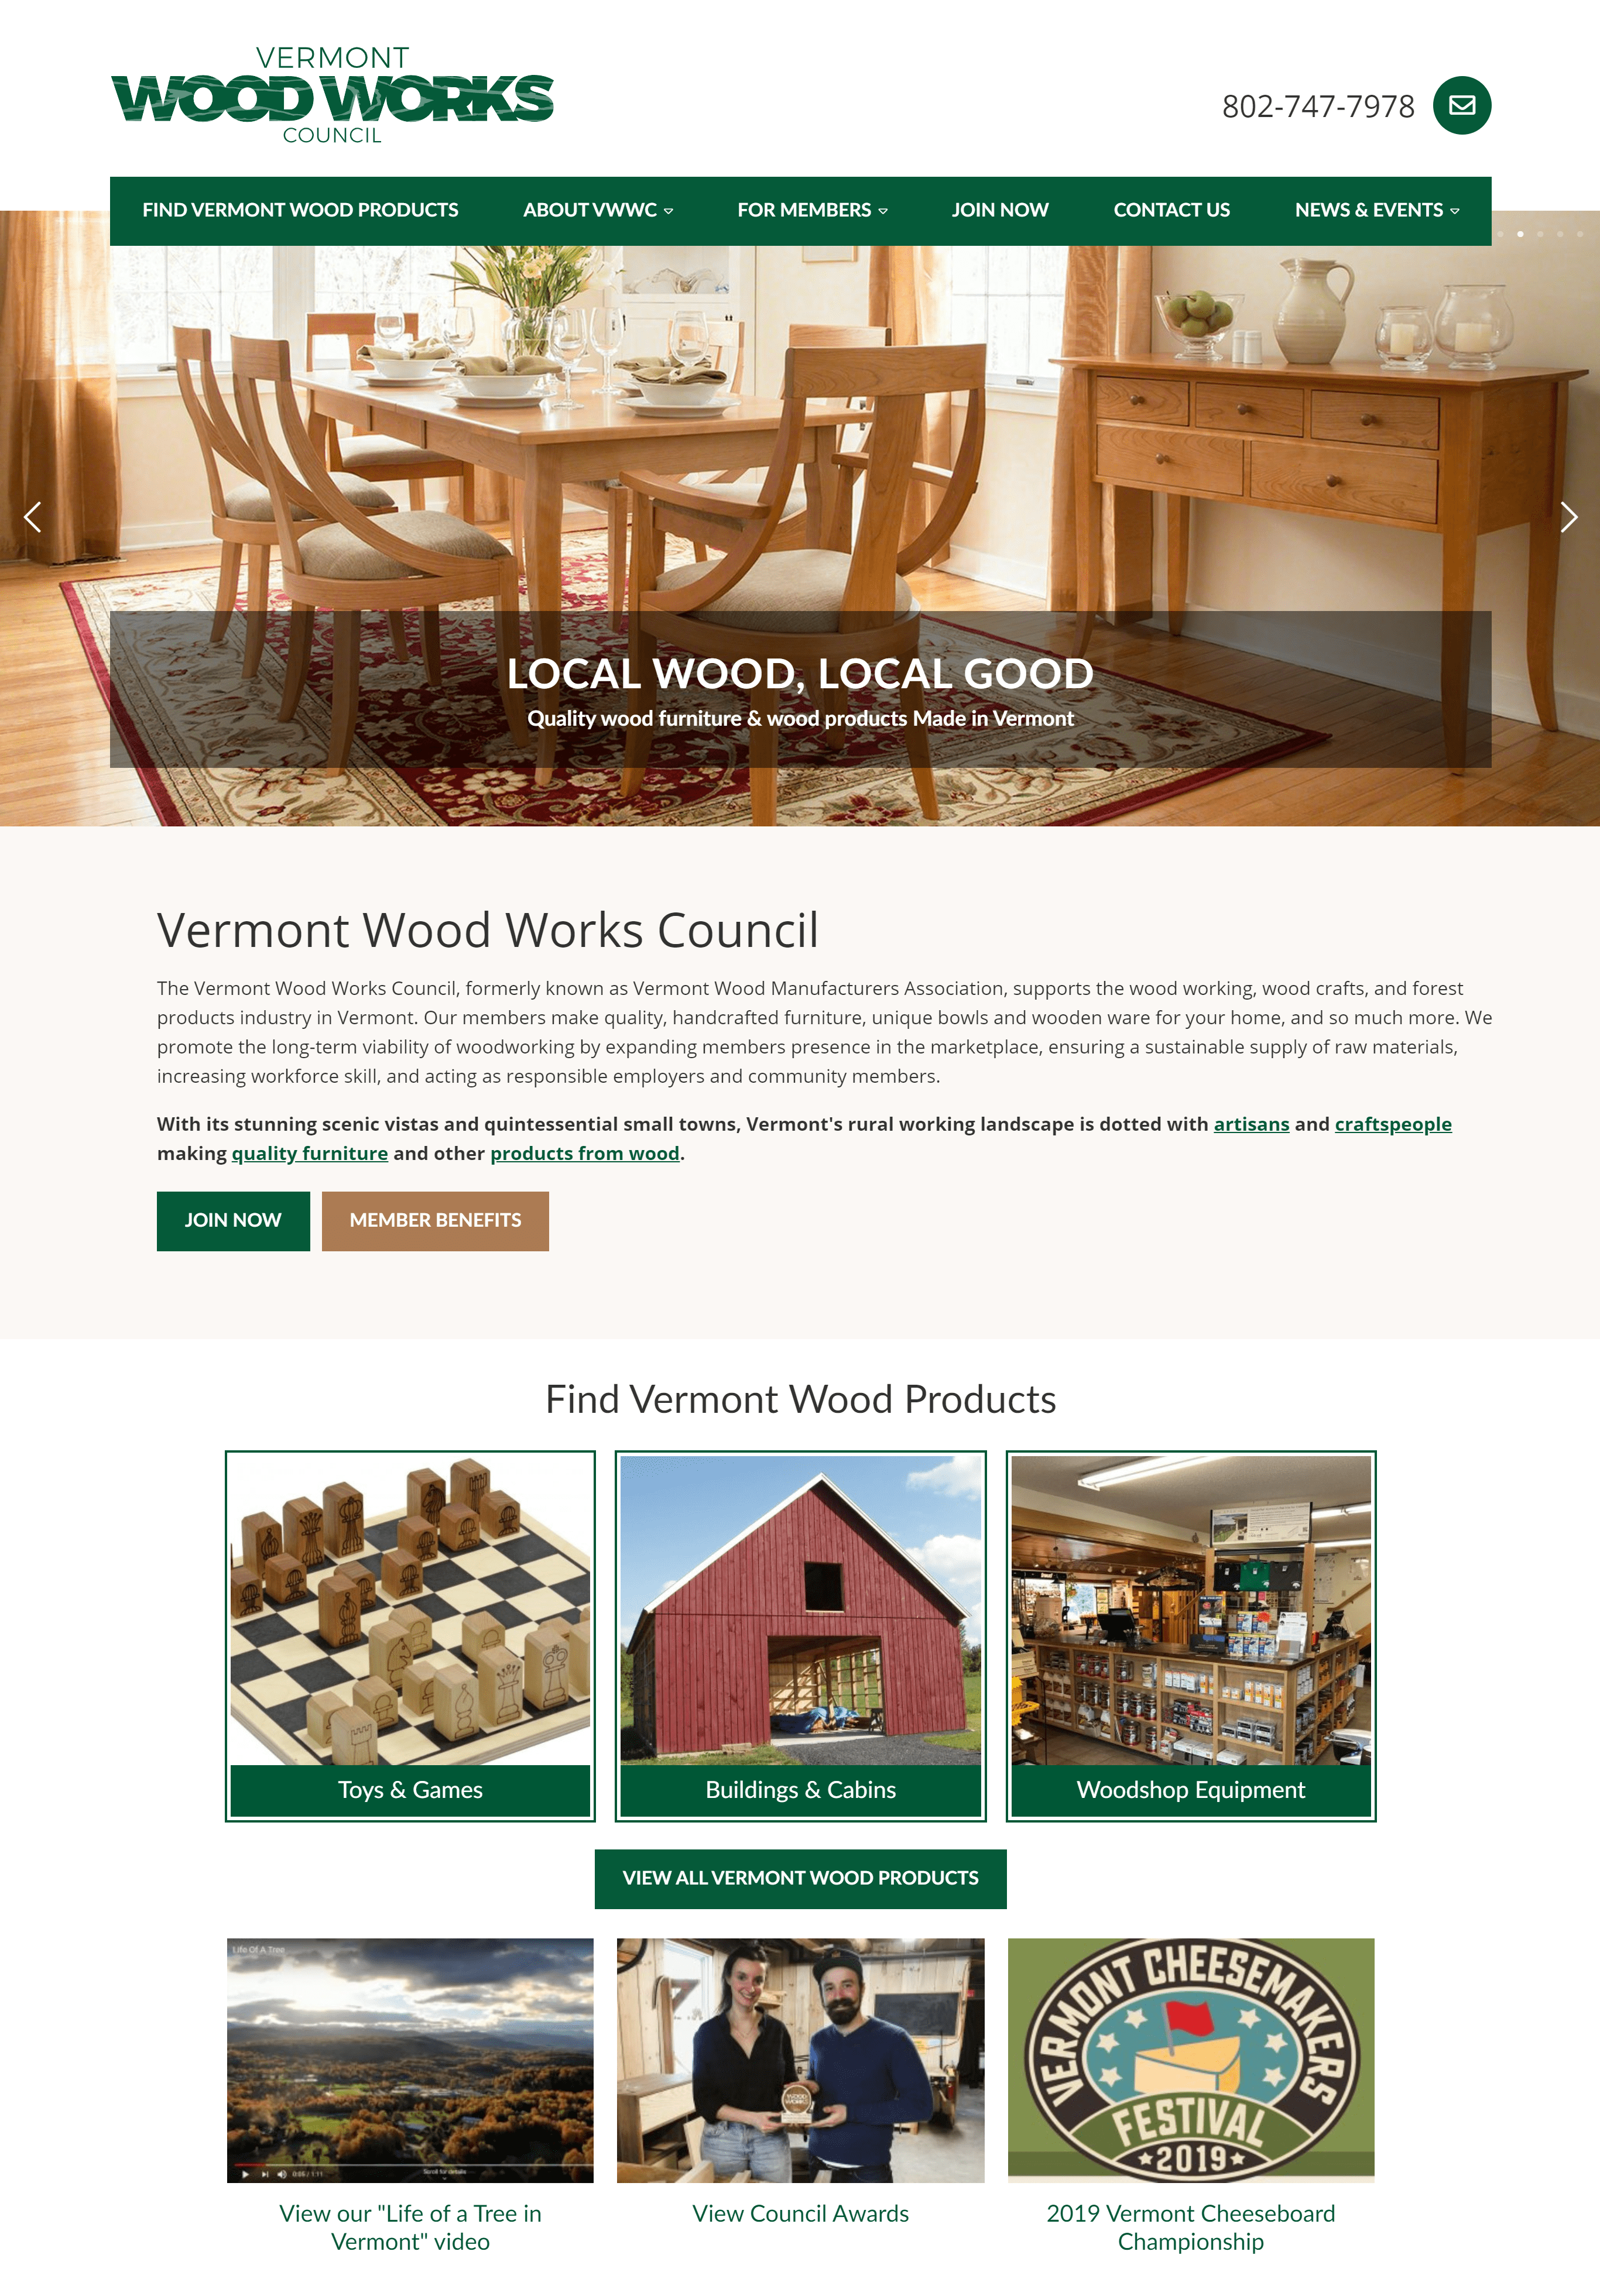 Vermont Wood Works Council